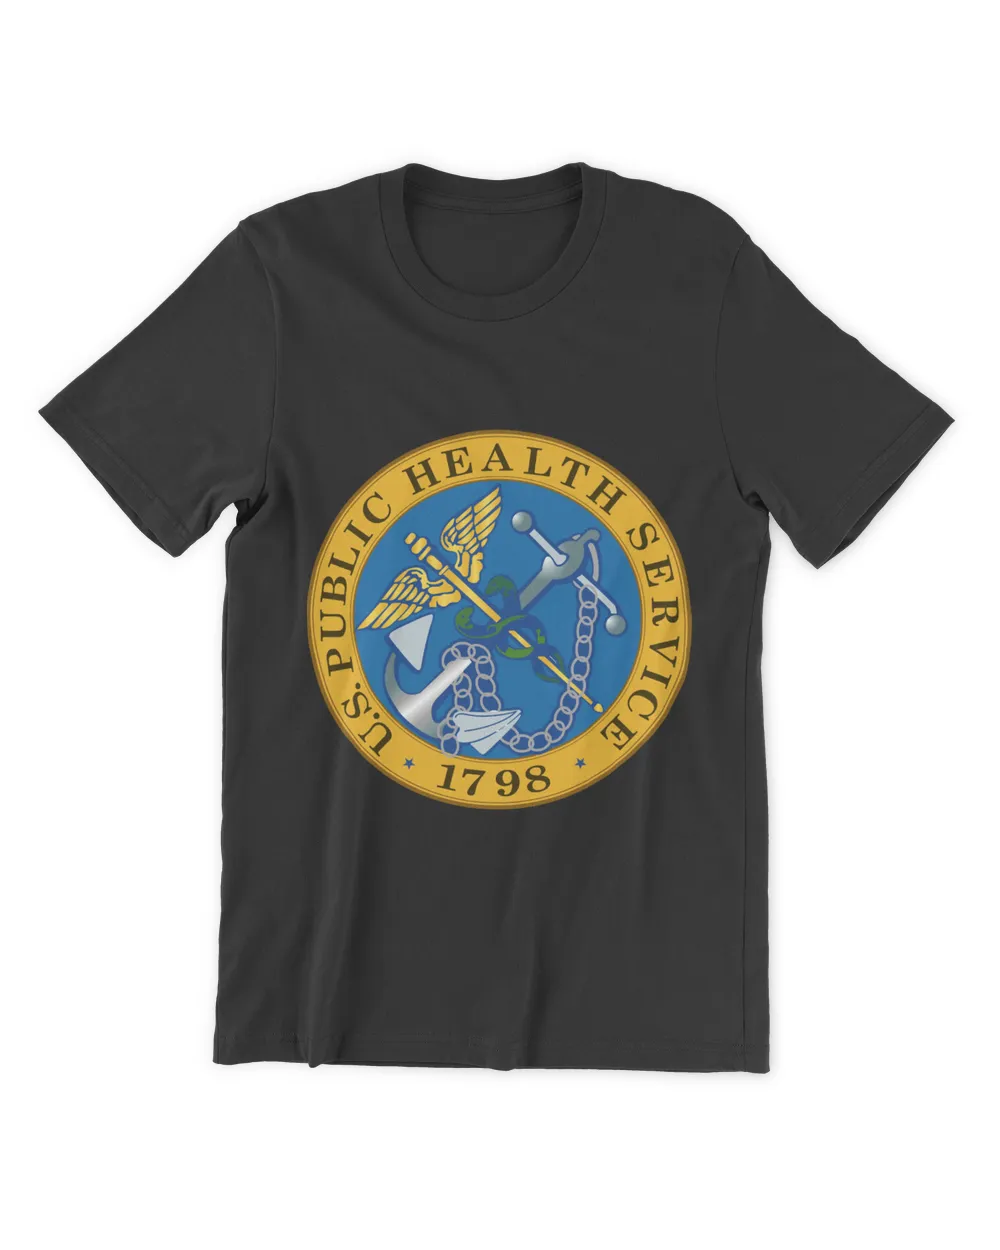 USPHS - United States Public Health Service Seal - Color Essential T-Shirt